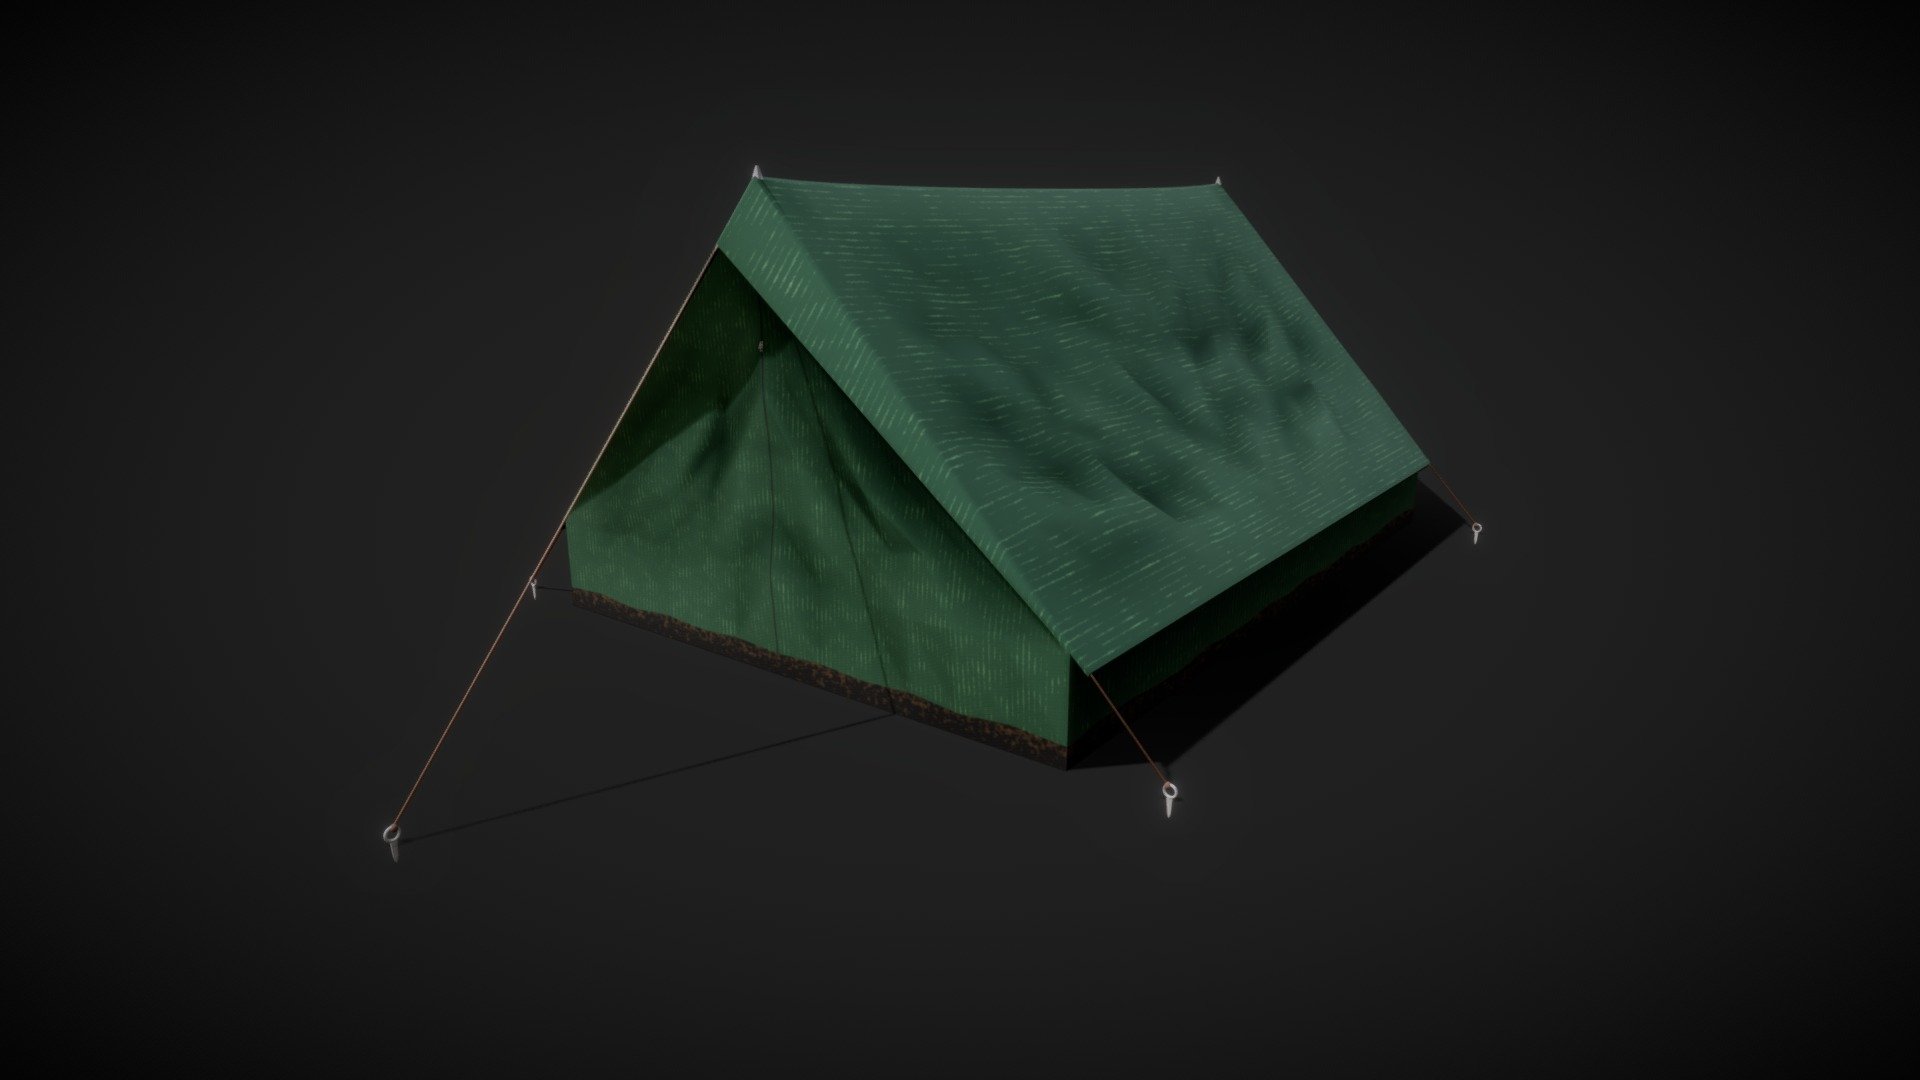 A cozy camping tent for the adventurous hike.

4K textures are included 3d model